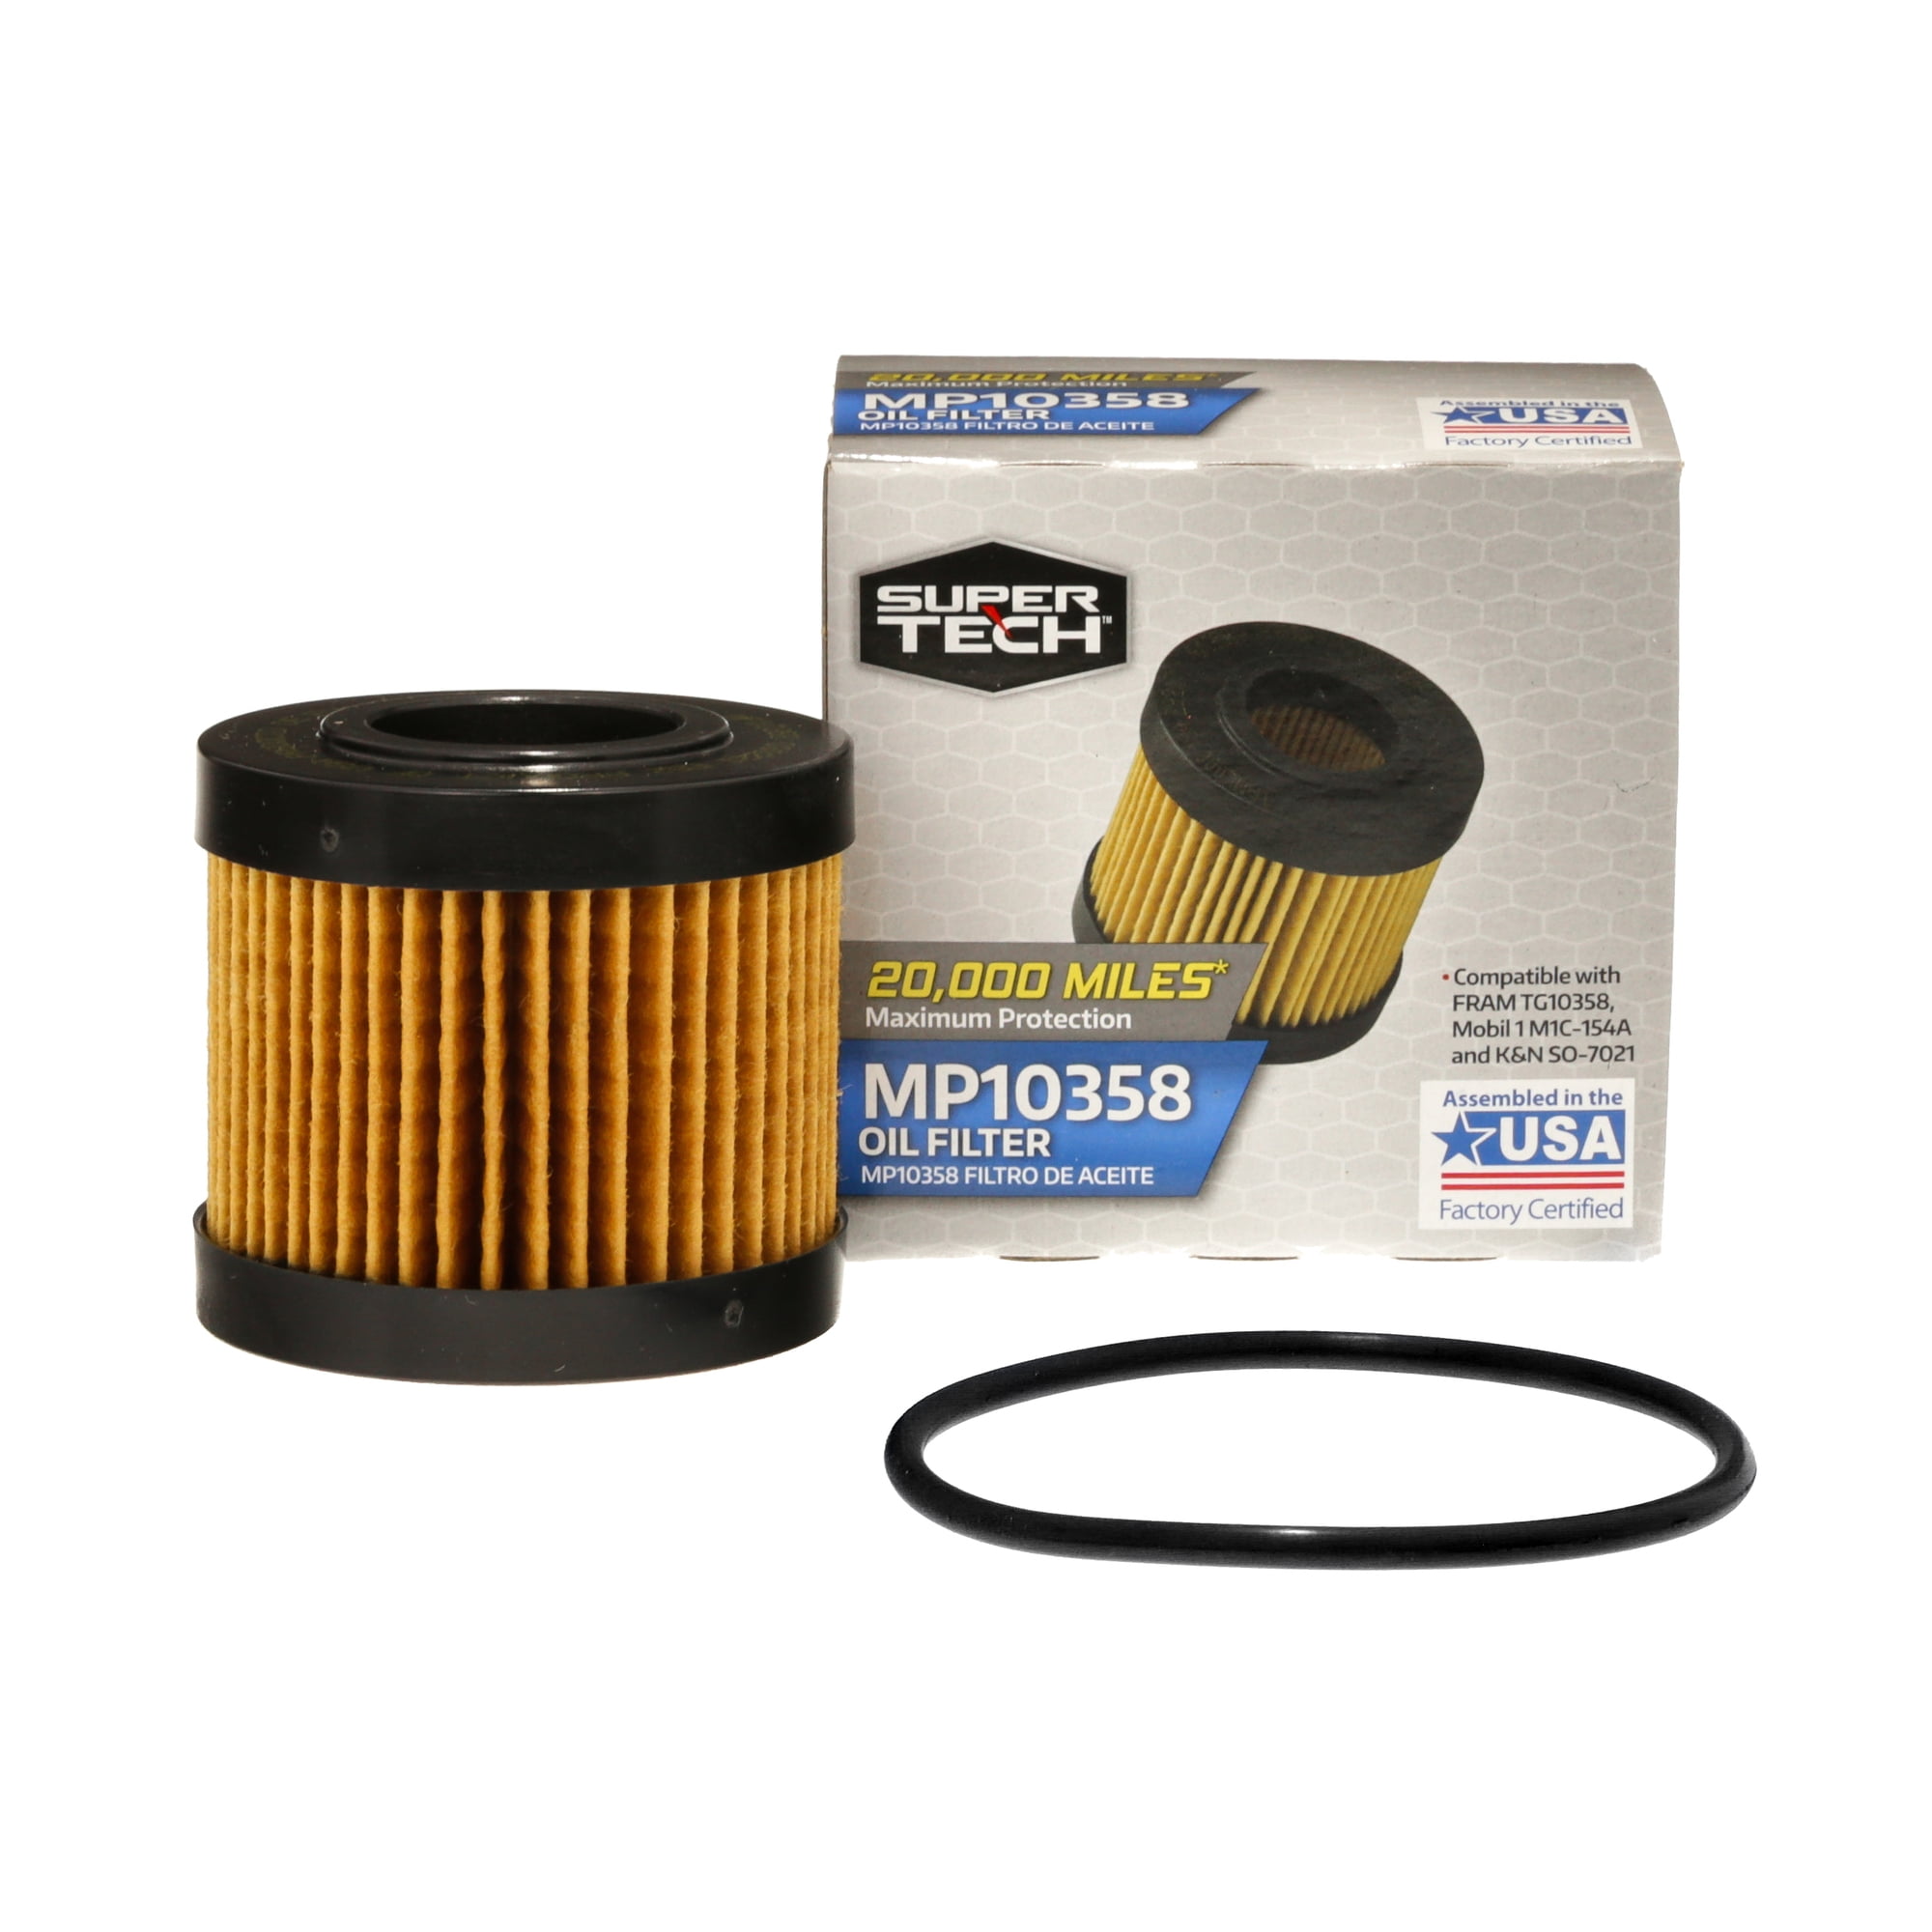 SuperTech Maximum Performance 20,000 mile Replacement Sythetic Oil Filter, MP10358, for Toyota and Scion